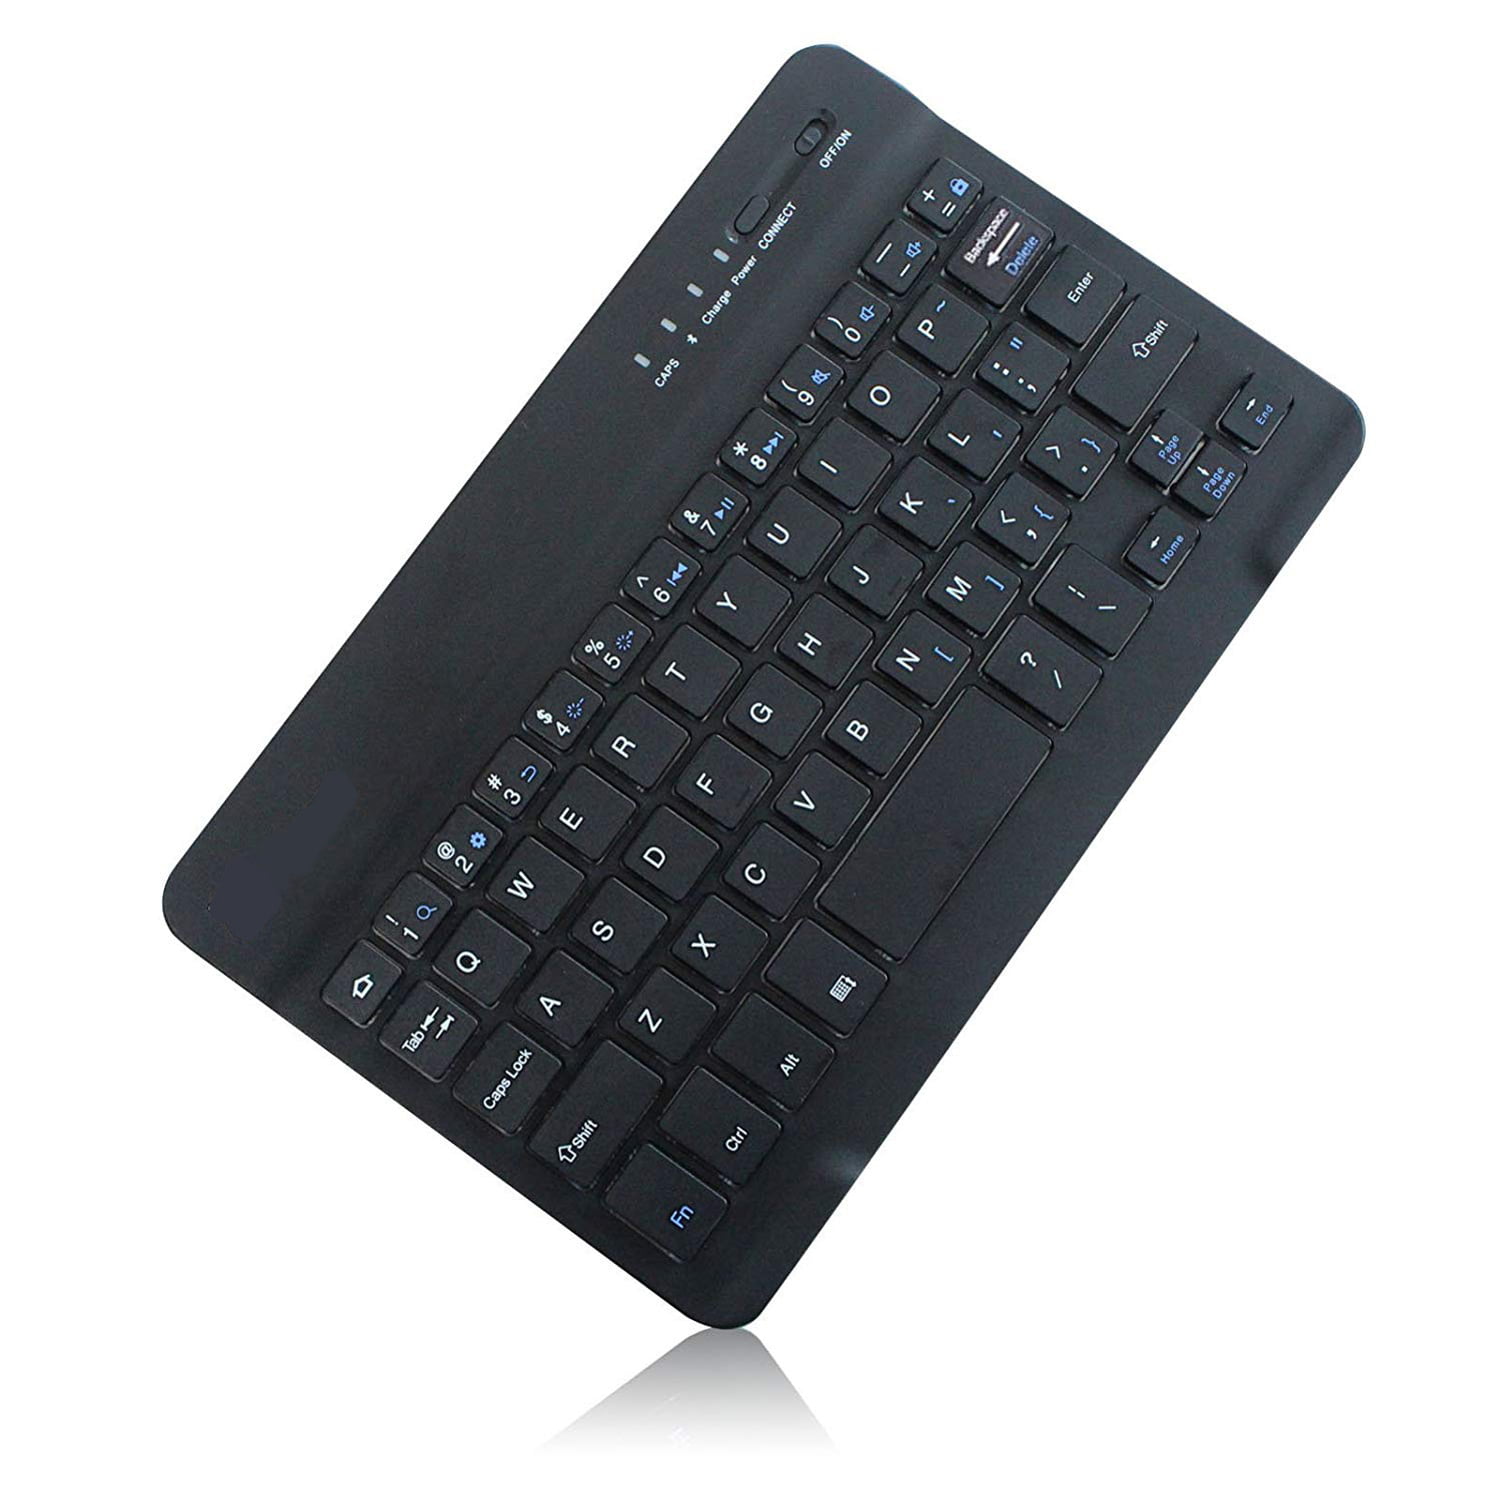 duisternis Anemoon vis Wet en regelgeving Ultra Slim Wireless Keyboard Rechargeable Portable Compact Z1Y for Samsung  Galaxy Tab S2 NOOK 8.0 (SM-T710) S3 9.7 S 8.4 SM-T700 S6 10.5 S5e 10.5 S4  10.5 SM-T800 Sky S9 Plus, S8